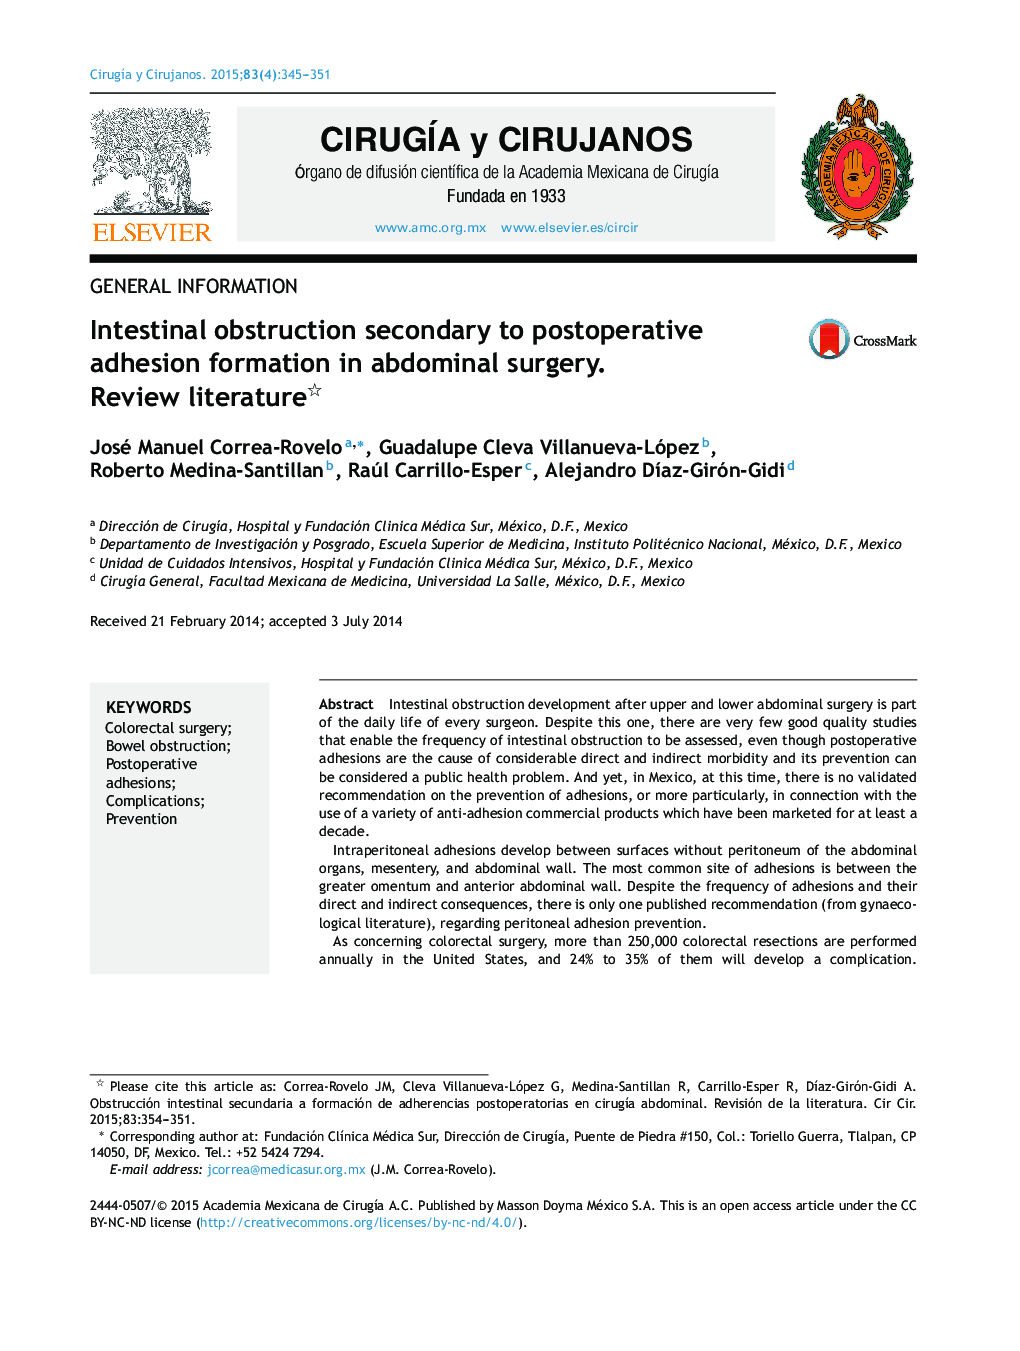 Intestinal obstruction secondary to postoperative adhesion formation in abdominal surgery. Review literature 